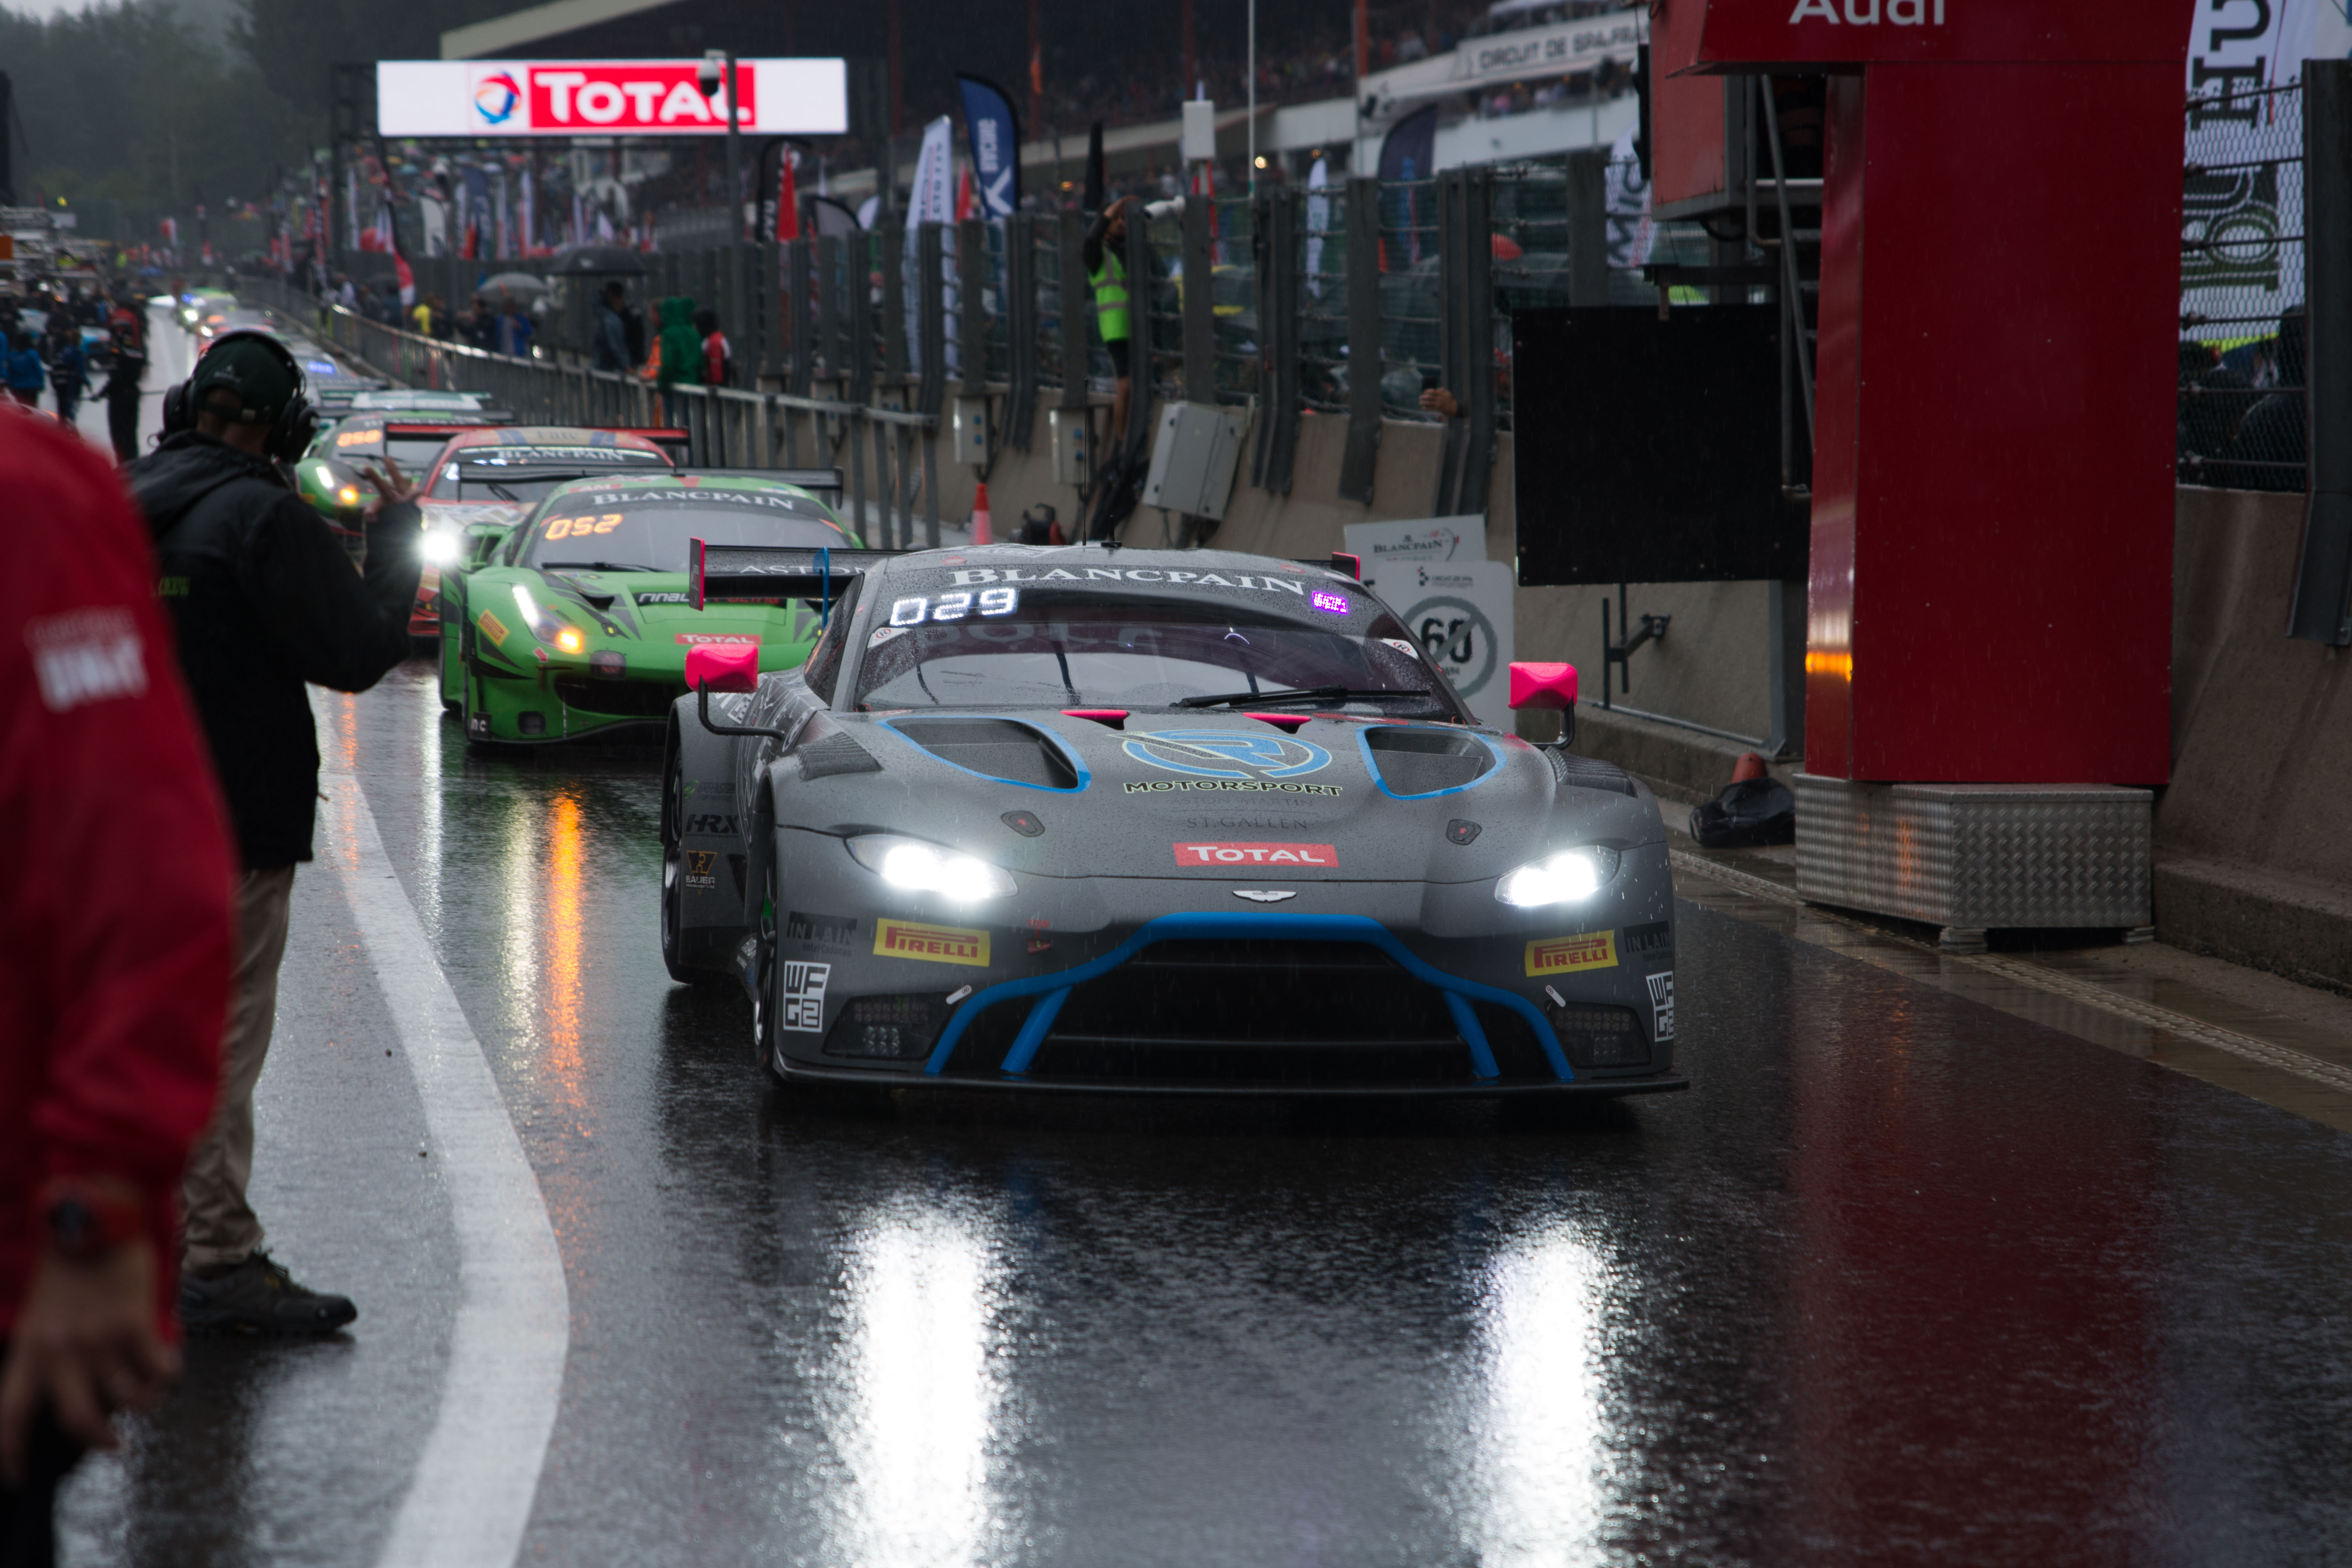 Event: 2019 Spa 24 hours